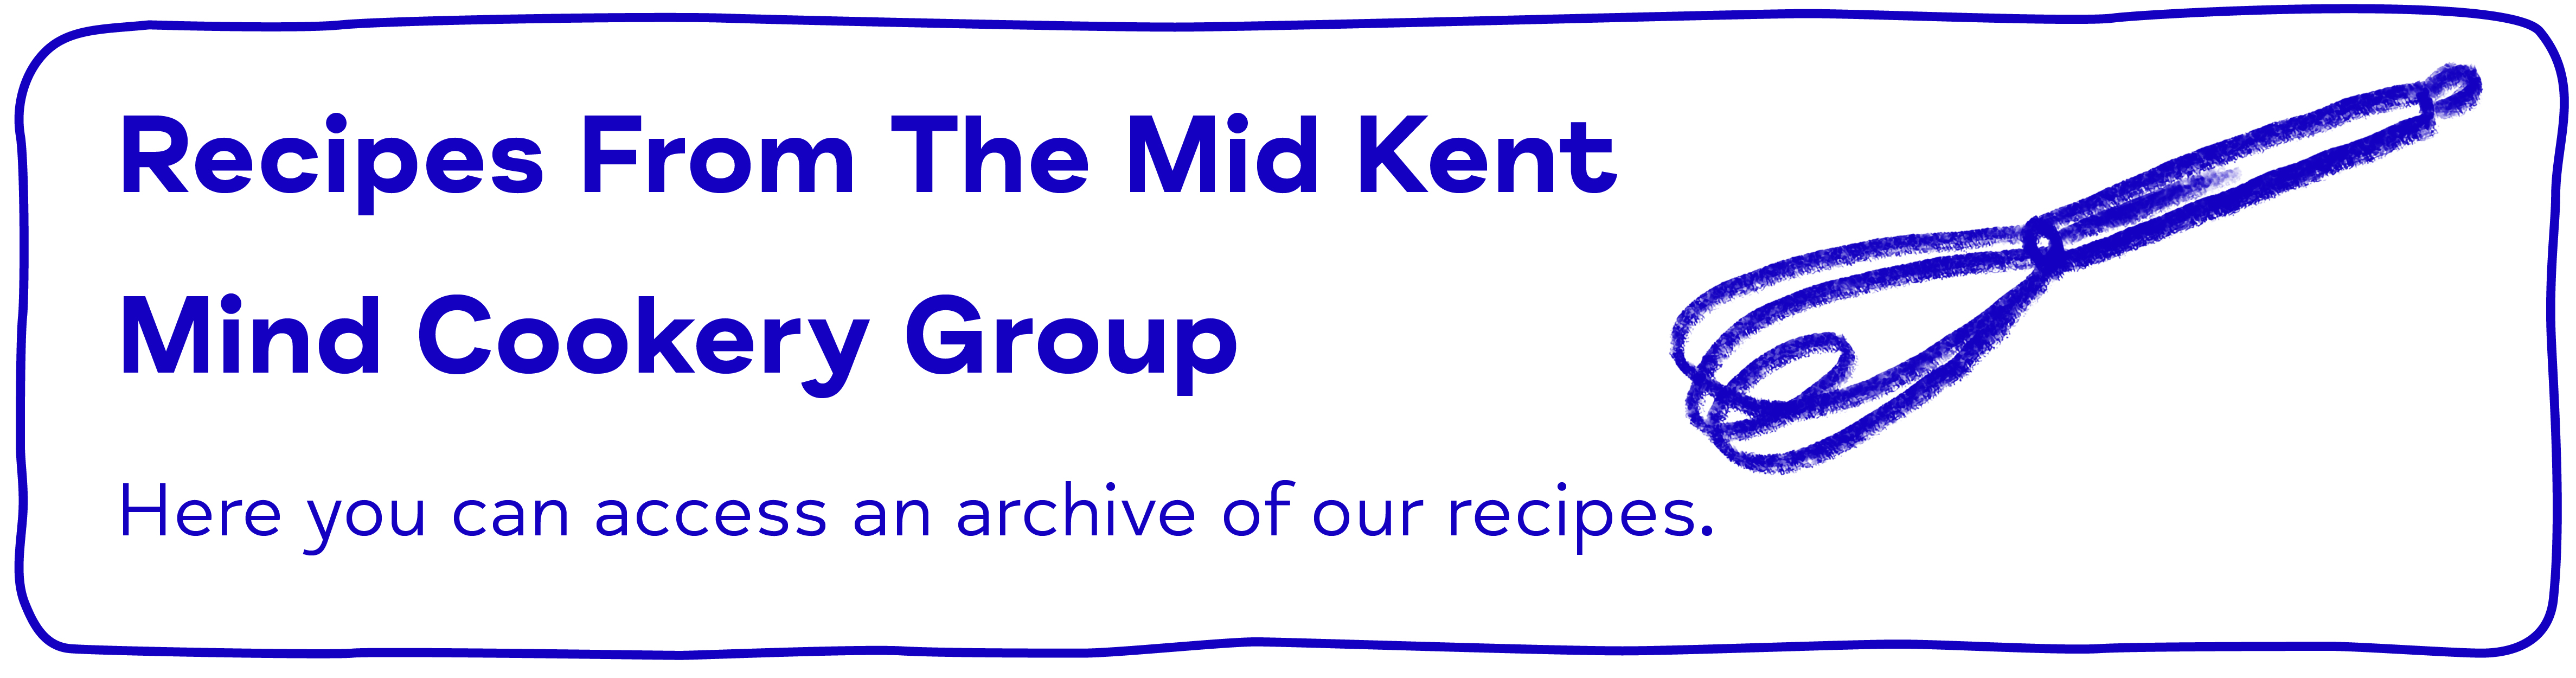 Recipes From The MMK Mind Maidstone Cookery Group. Here you can access an archive of our Recipes.